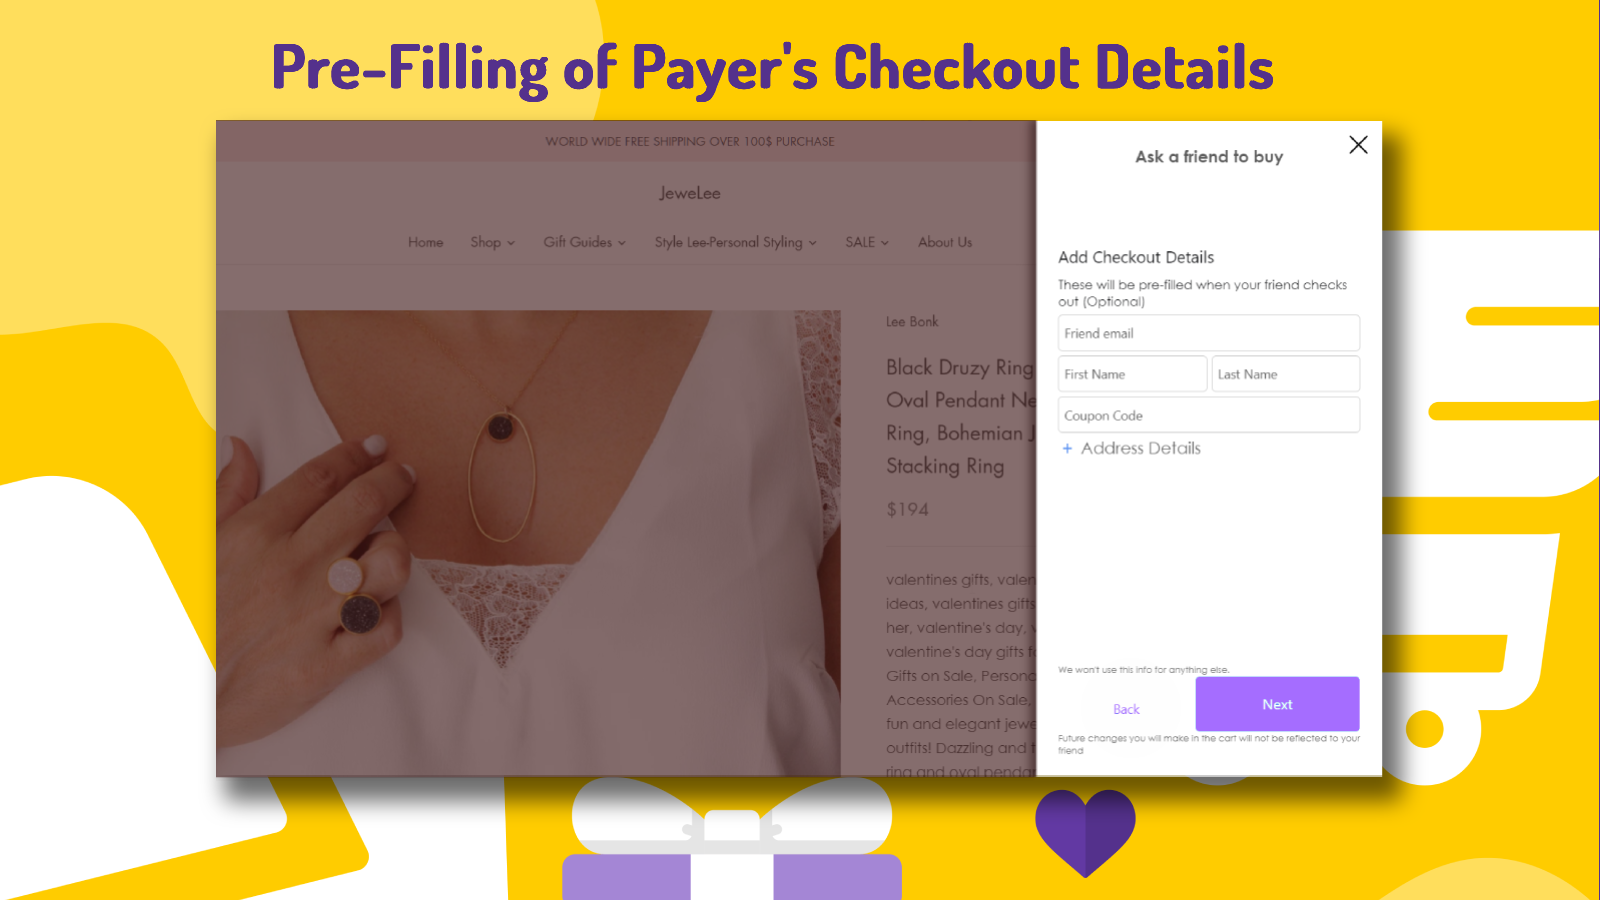 Visitor can pre-populate the checkout details of the payer